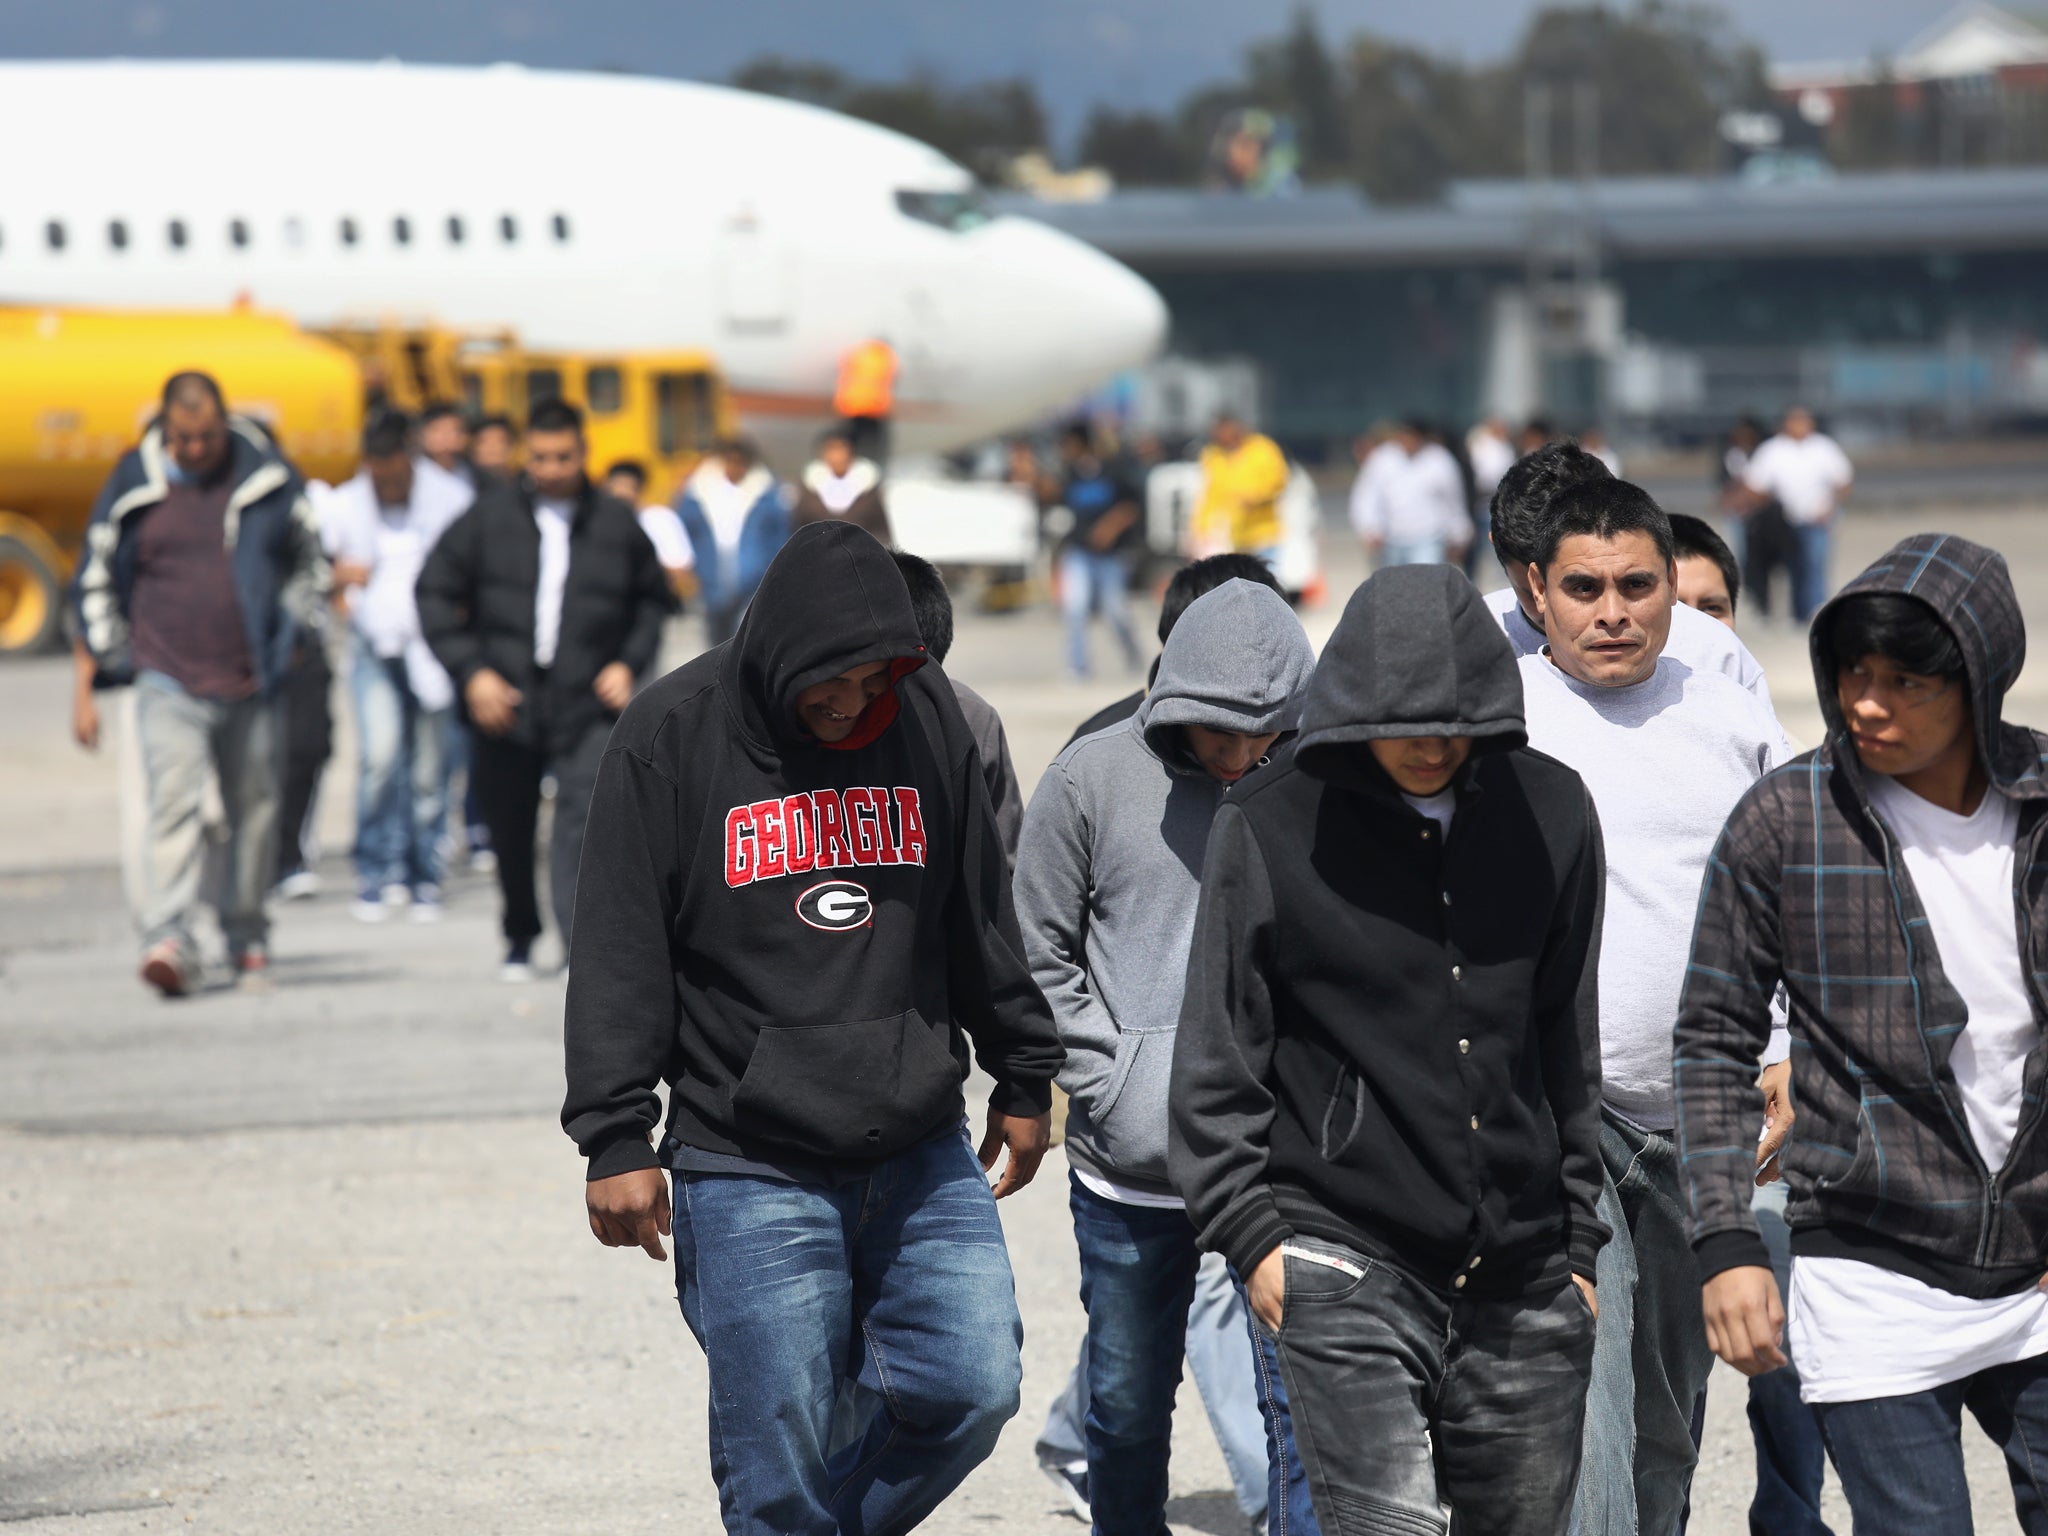 Guatemalan immigrants arrive in their home country after being deported from the US